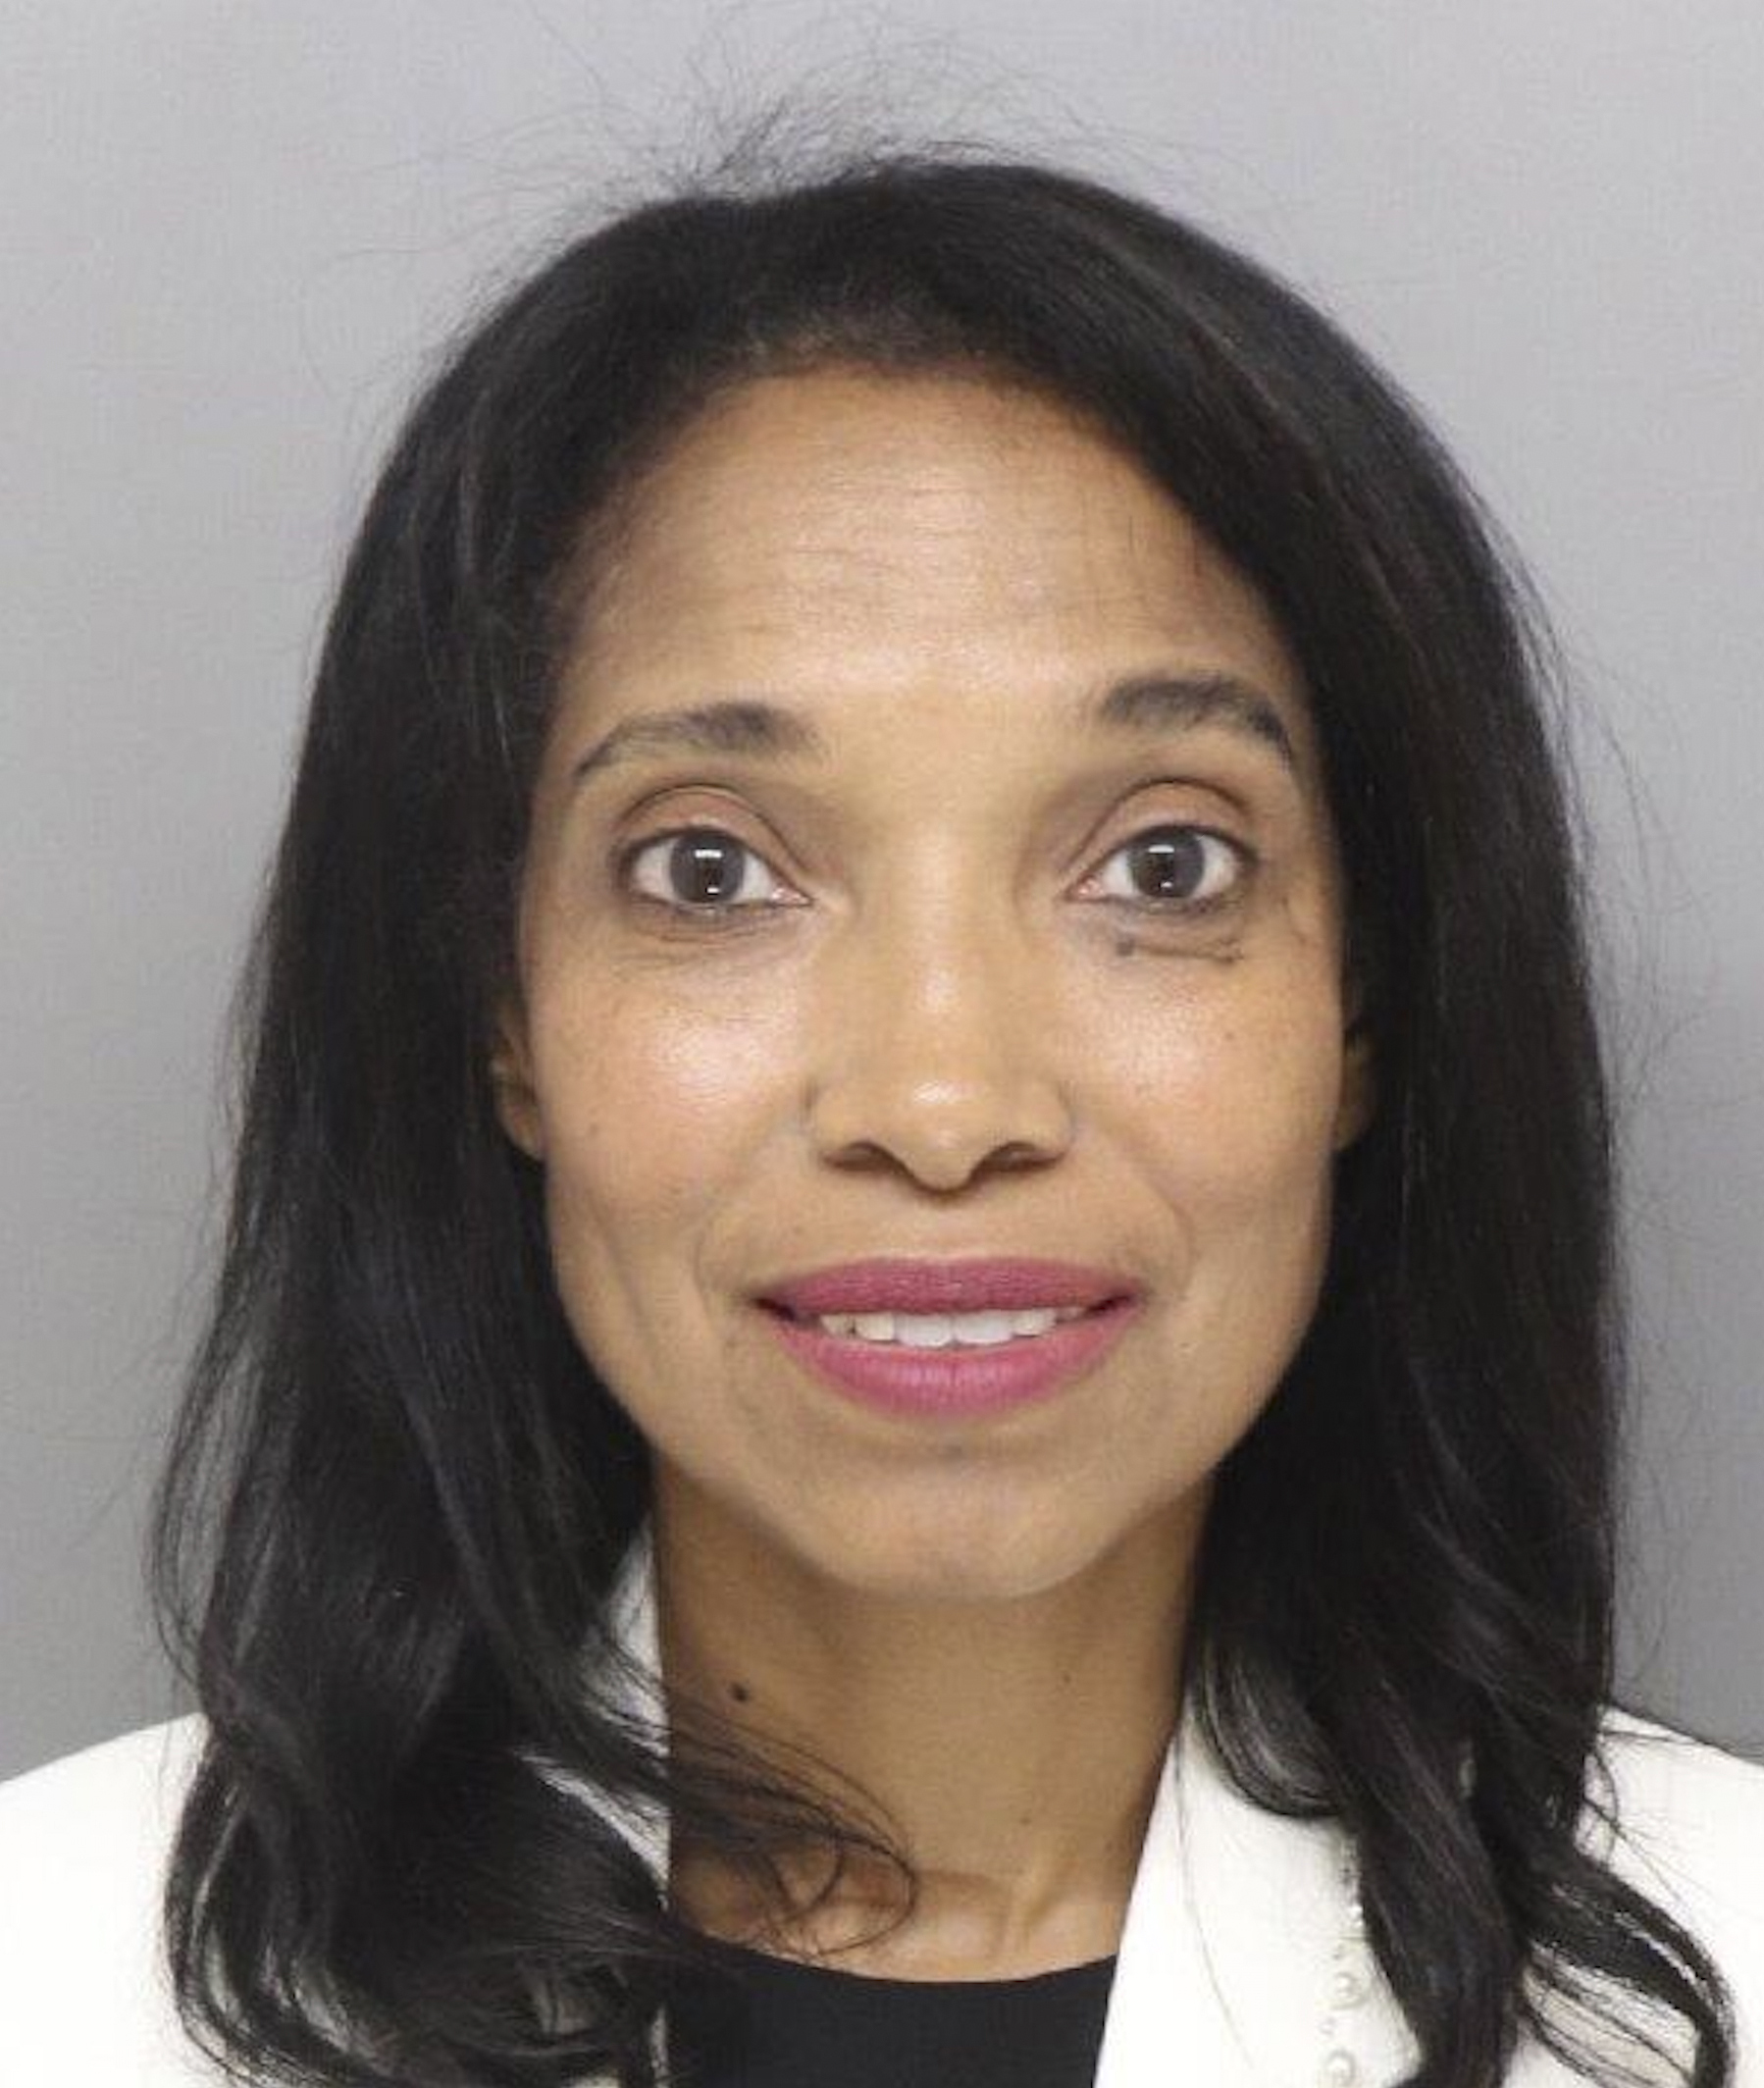 PHOTO: Former juvenile court judge Tracie Hunter is seen here in a booking photo.